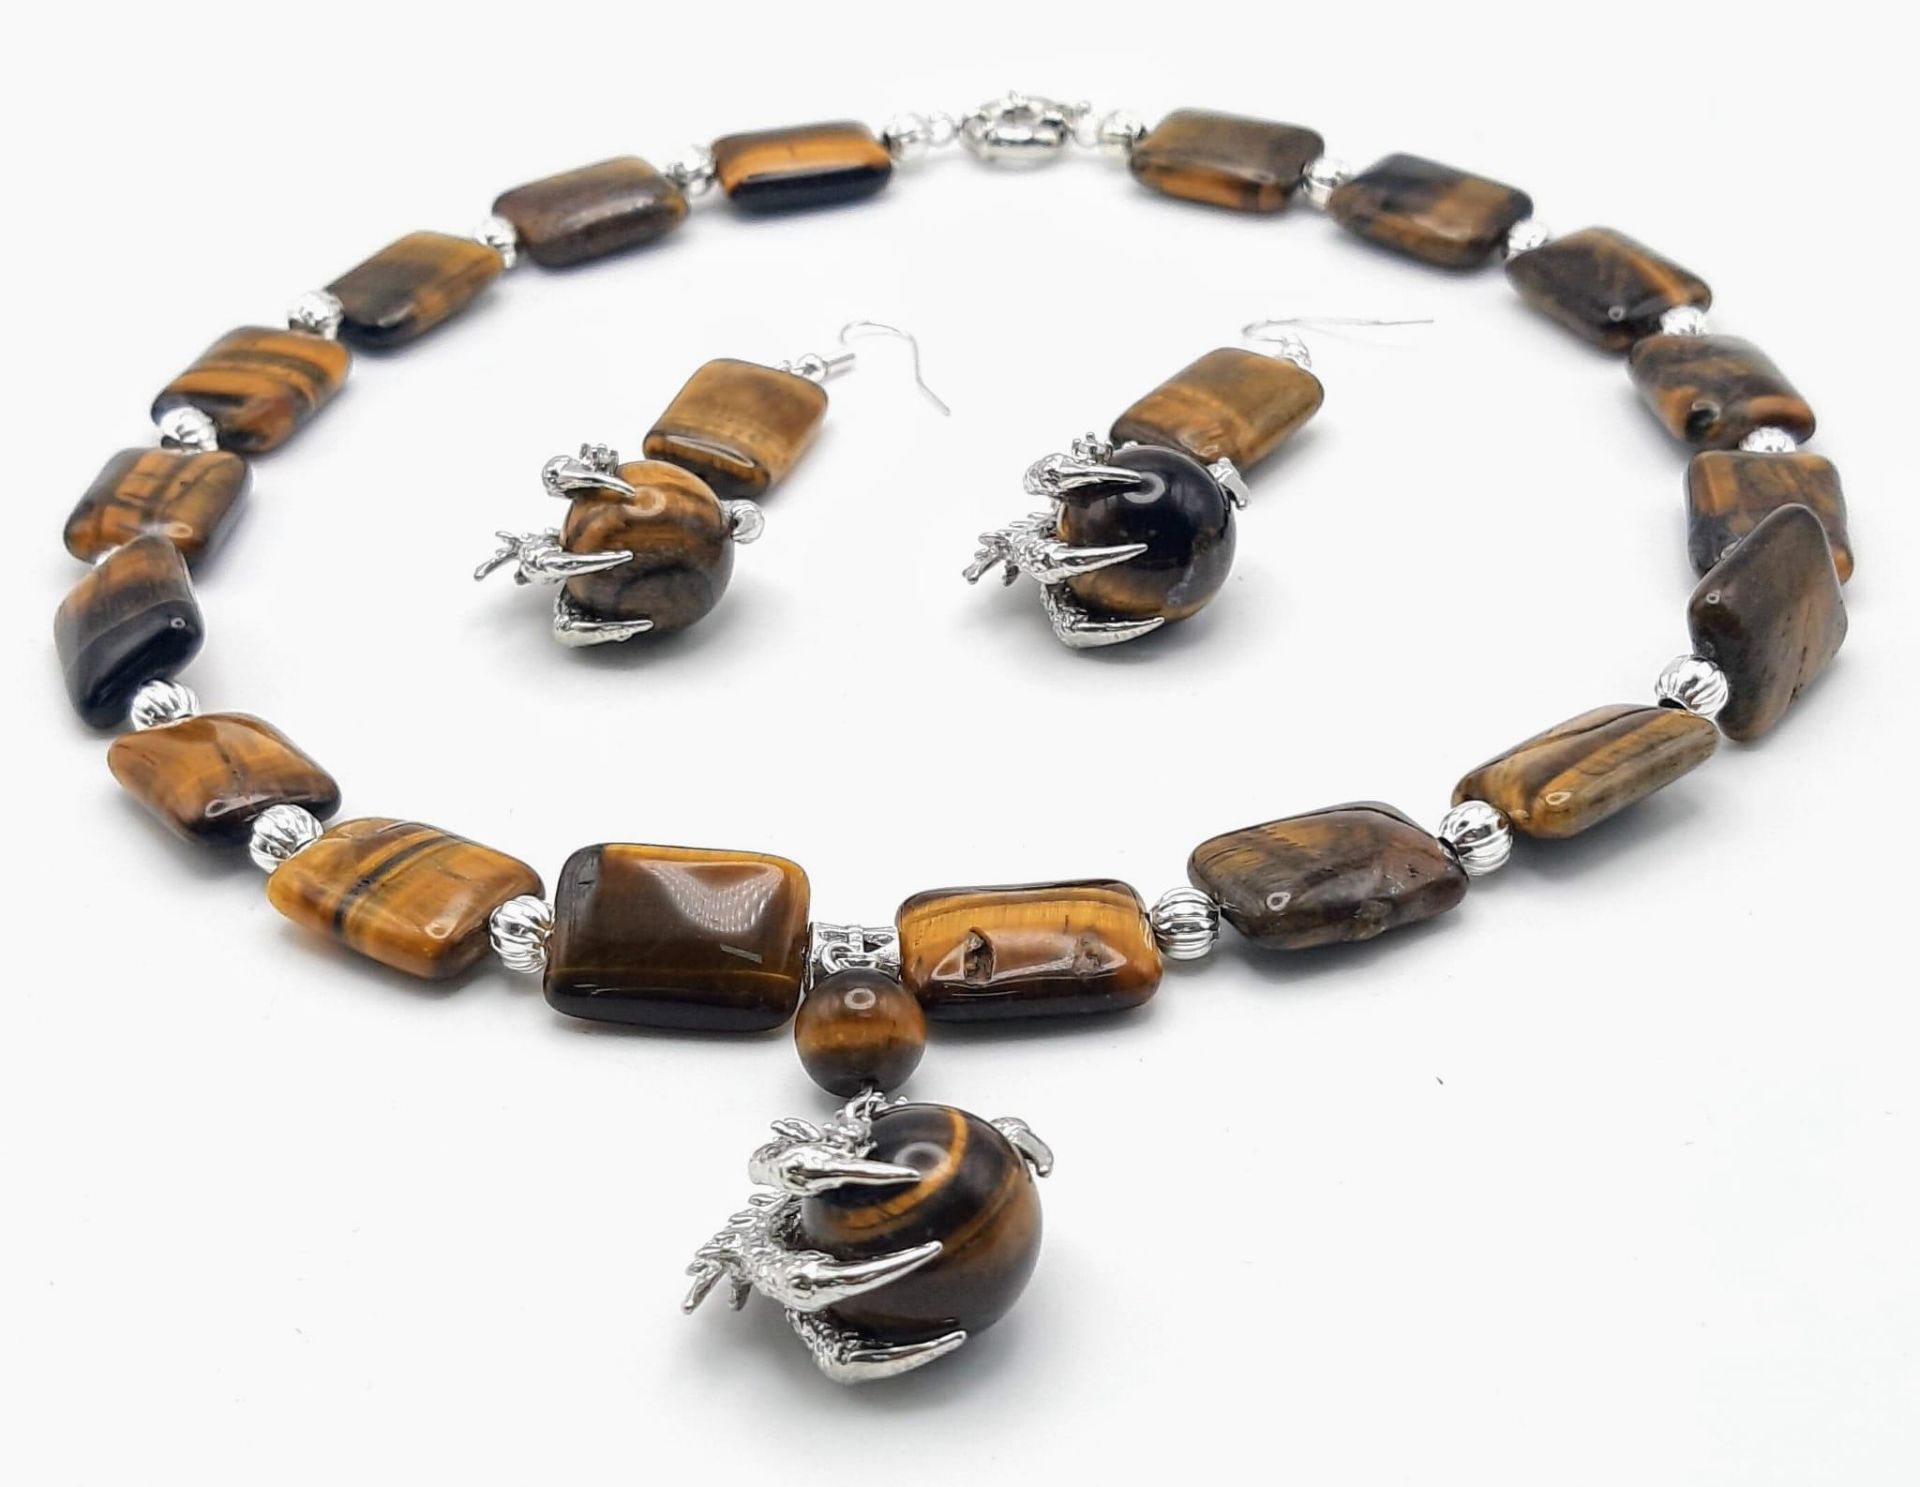 A substantial tiger’s eye necklace and earrings set with eagle claw pendants, beads 20 x 15 x 7 - Image 4 of 4